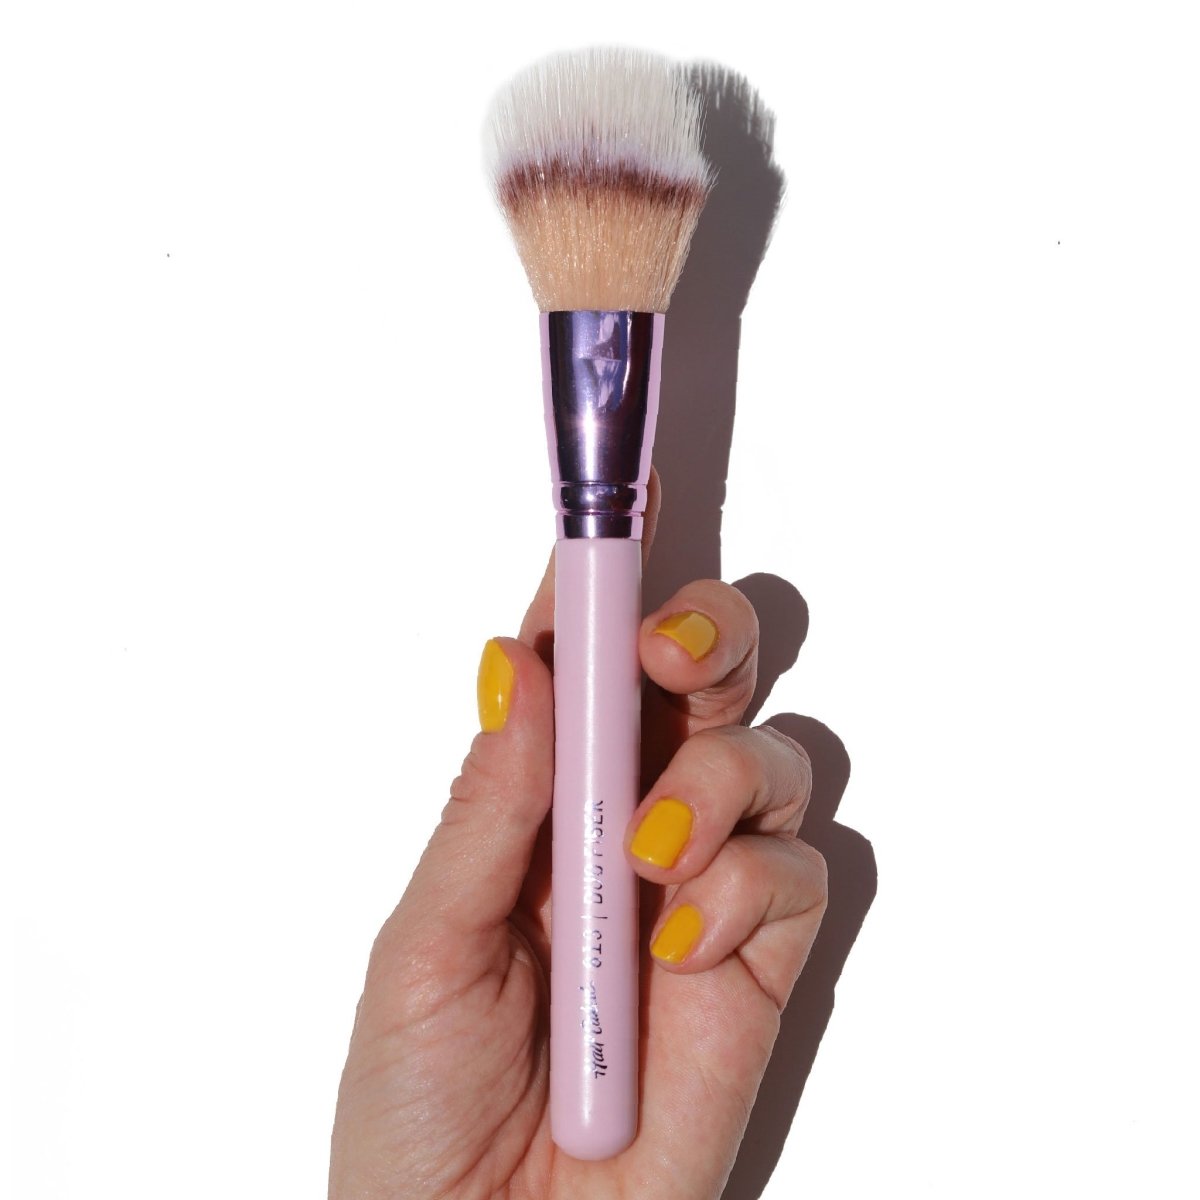 shiny purple tan brown and white blush brush in hand with yellow fingernails - duo fiber - half caked makeup